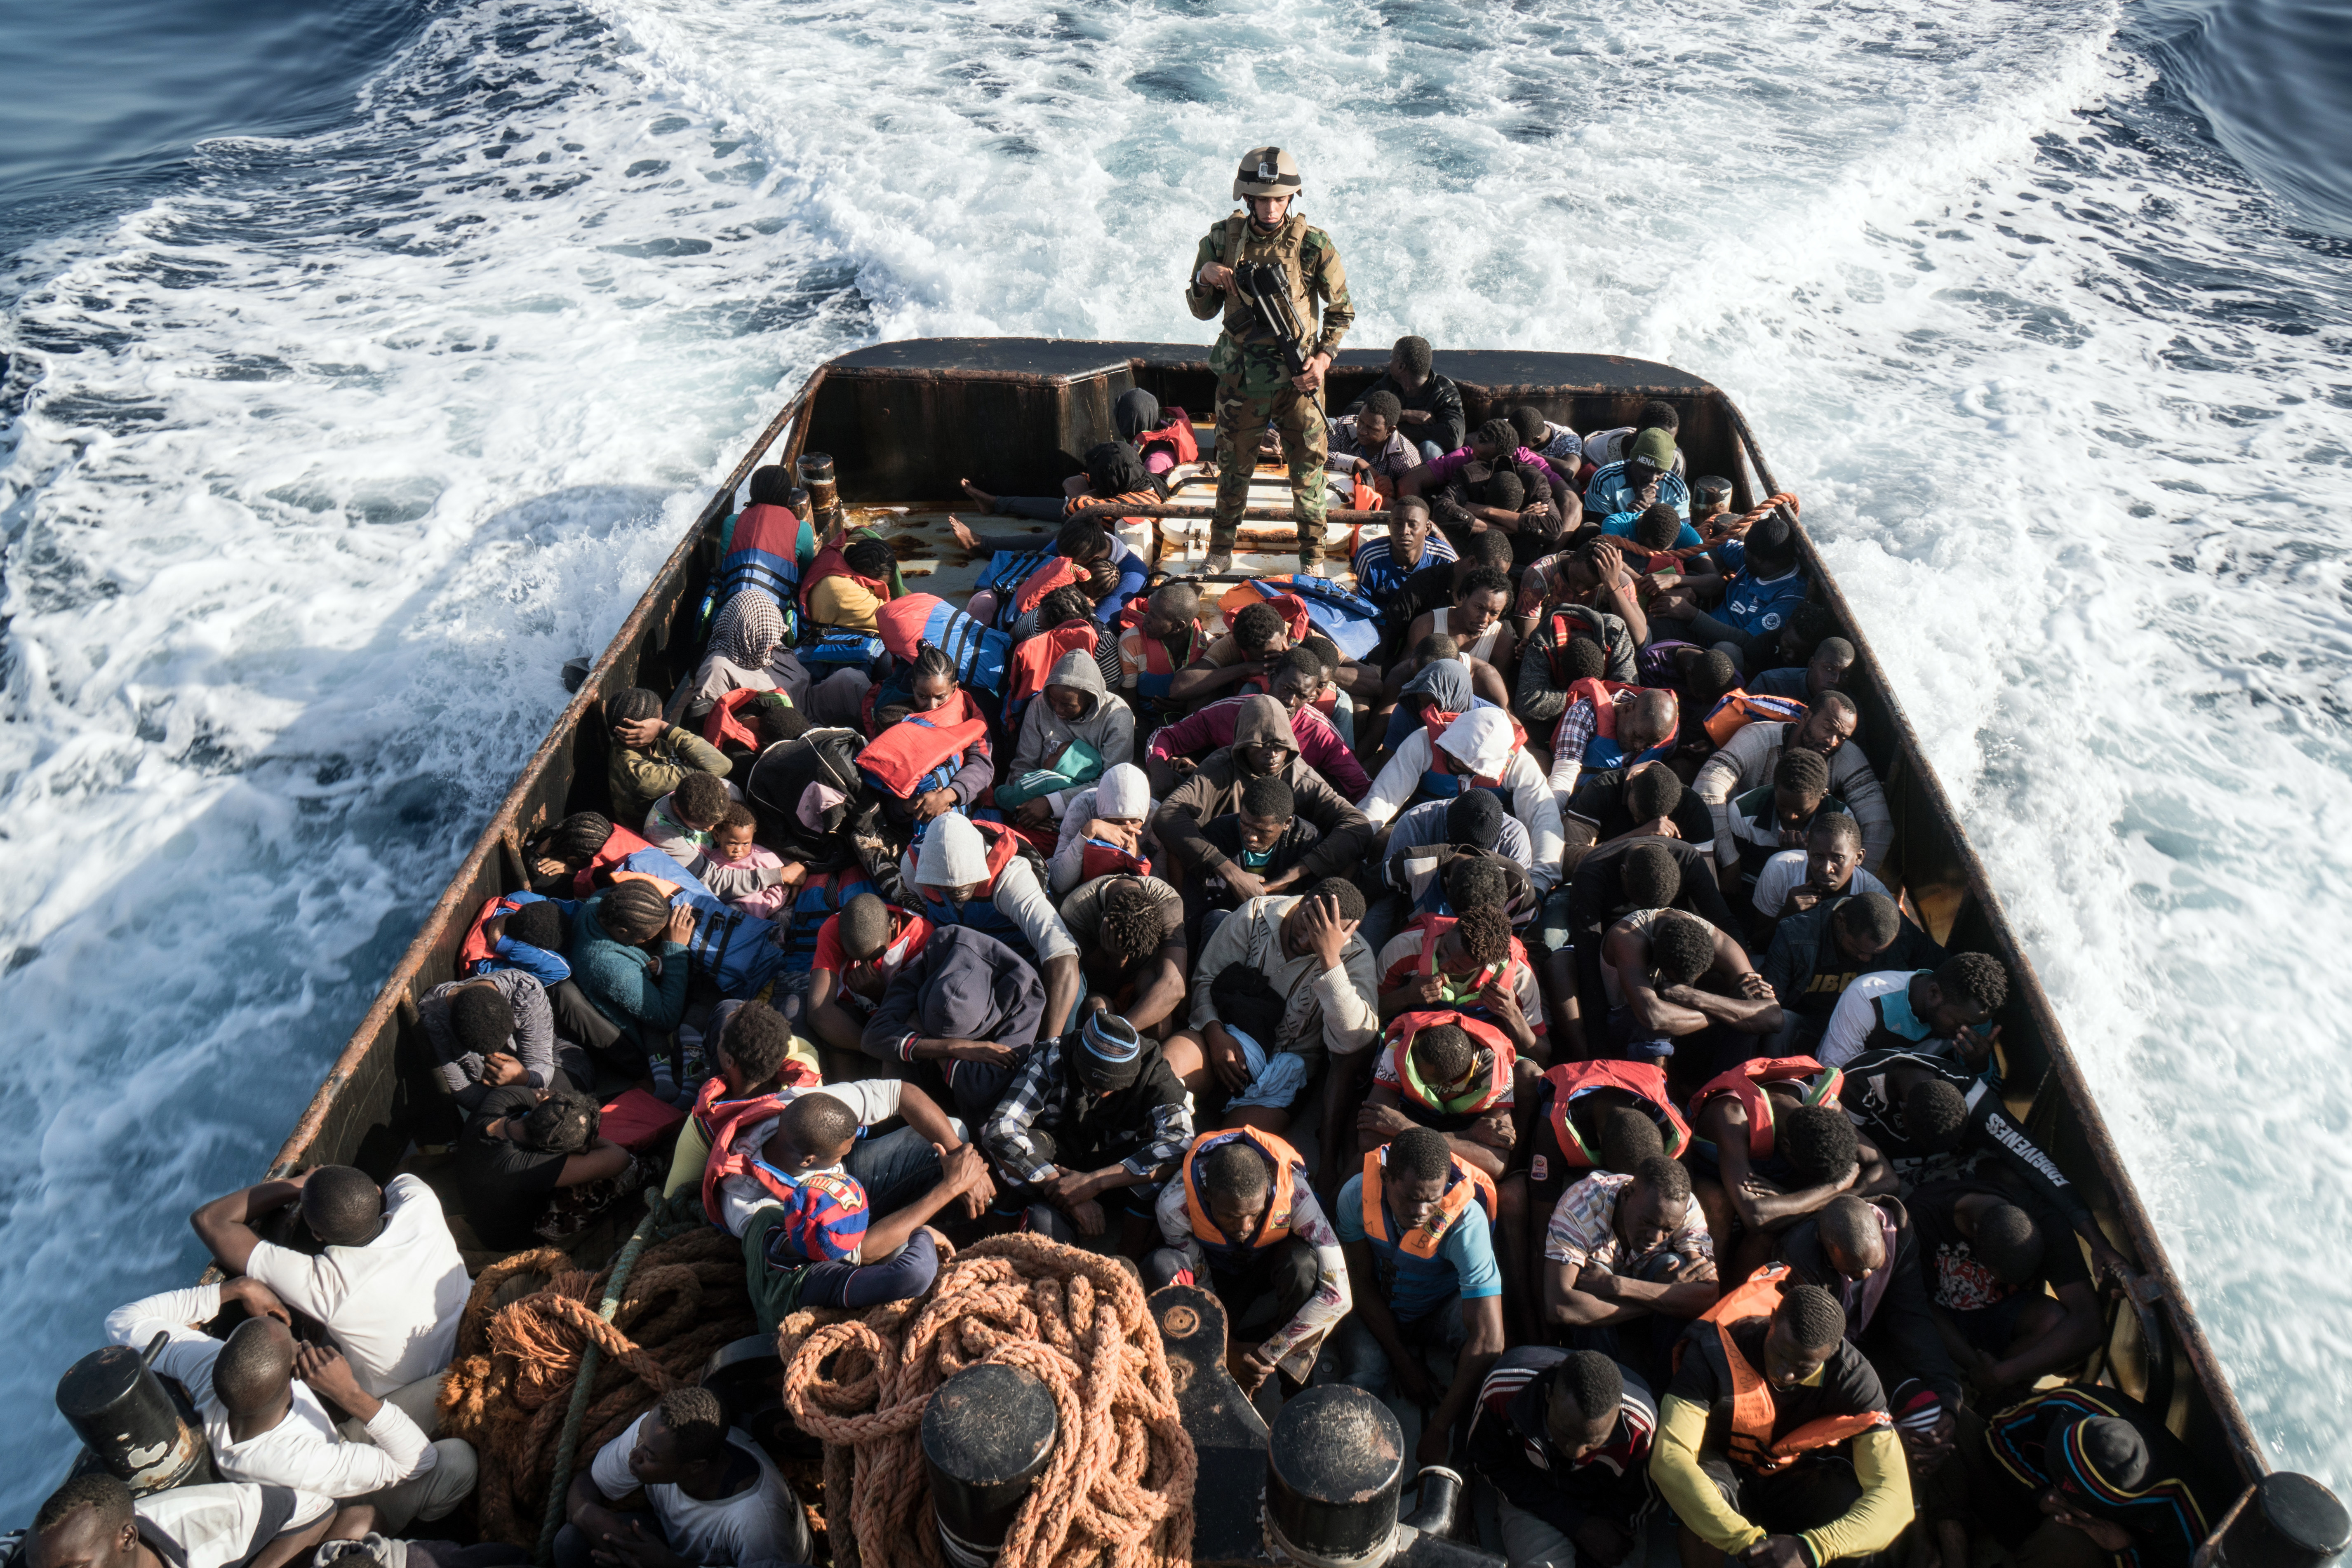 A Libyan coast guardsman stands on a boat during the rescue of 147 illegal immigrants attempting to reach Europe off the coastal town of Zawiyah, 45 kilometres west of the capital Tripoli, on June 27, 2017..More than 8,000 migrants have been rescued in waters off Libya during the past 48 hours in difficult weather conditions, Italy's coastguard said on June